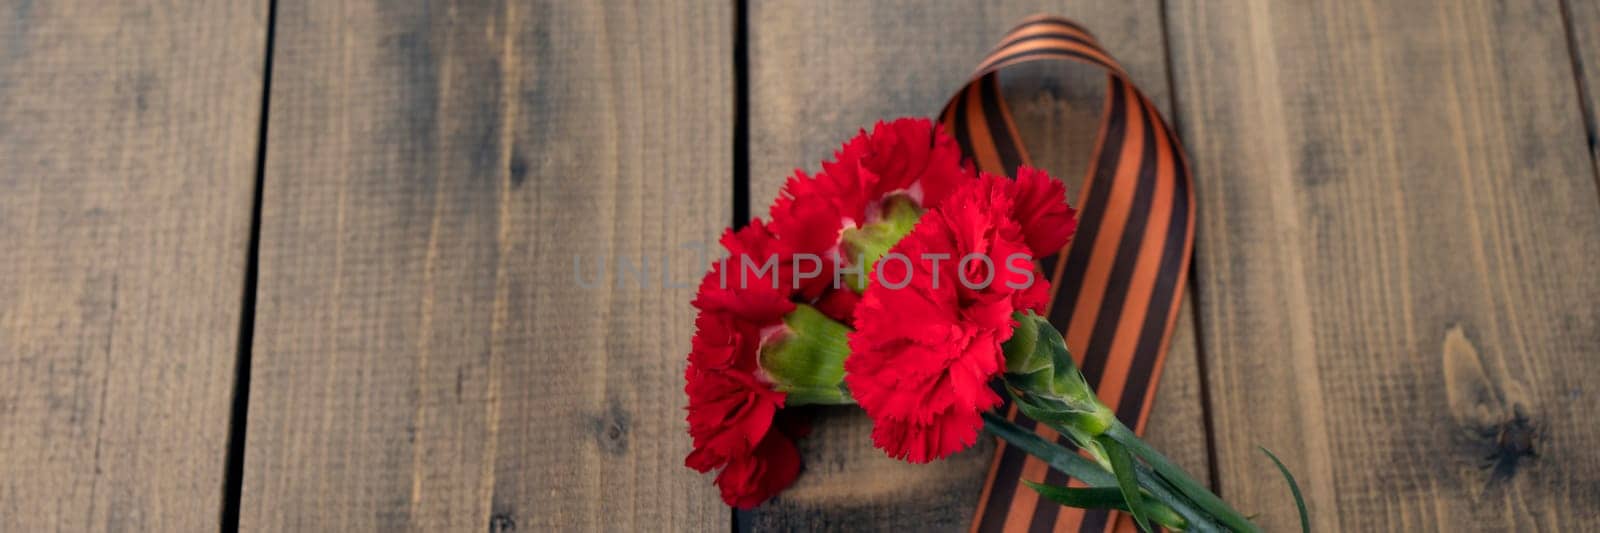 banner of three red carnations with a St. George ribbon on a wooden background. Georgievsk ribbon - Russian symbol of victory and three red carnations. Holiday card for the holiday of May 9. by Leoschka